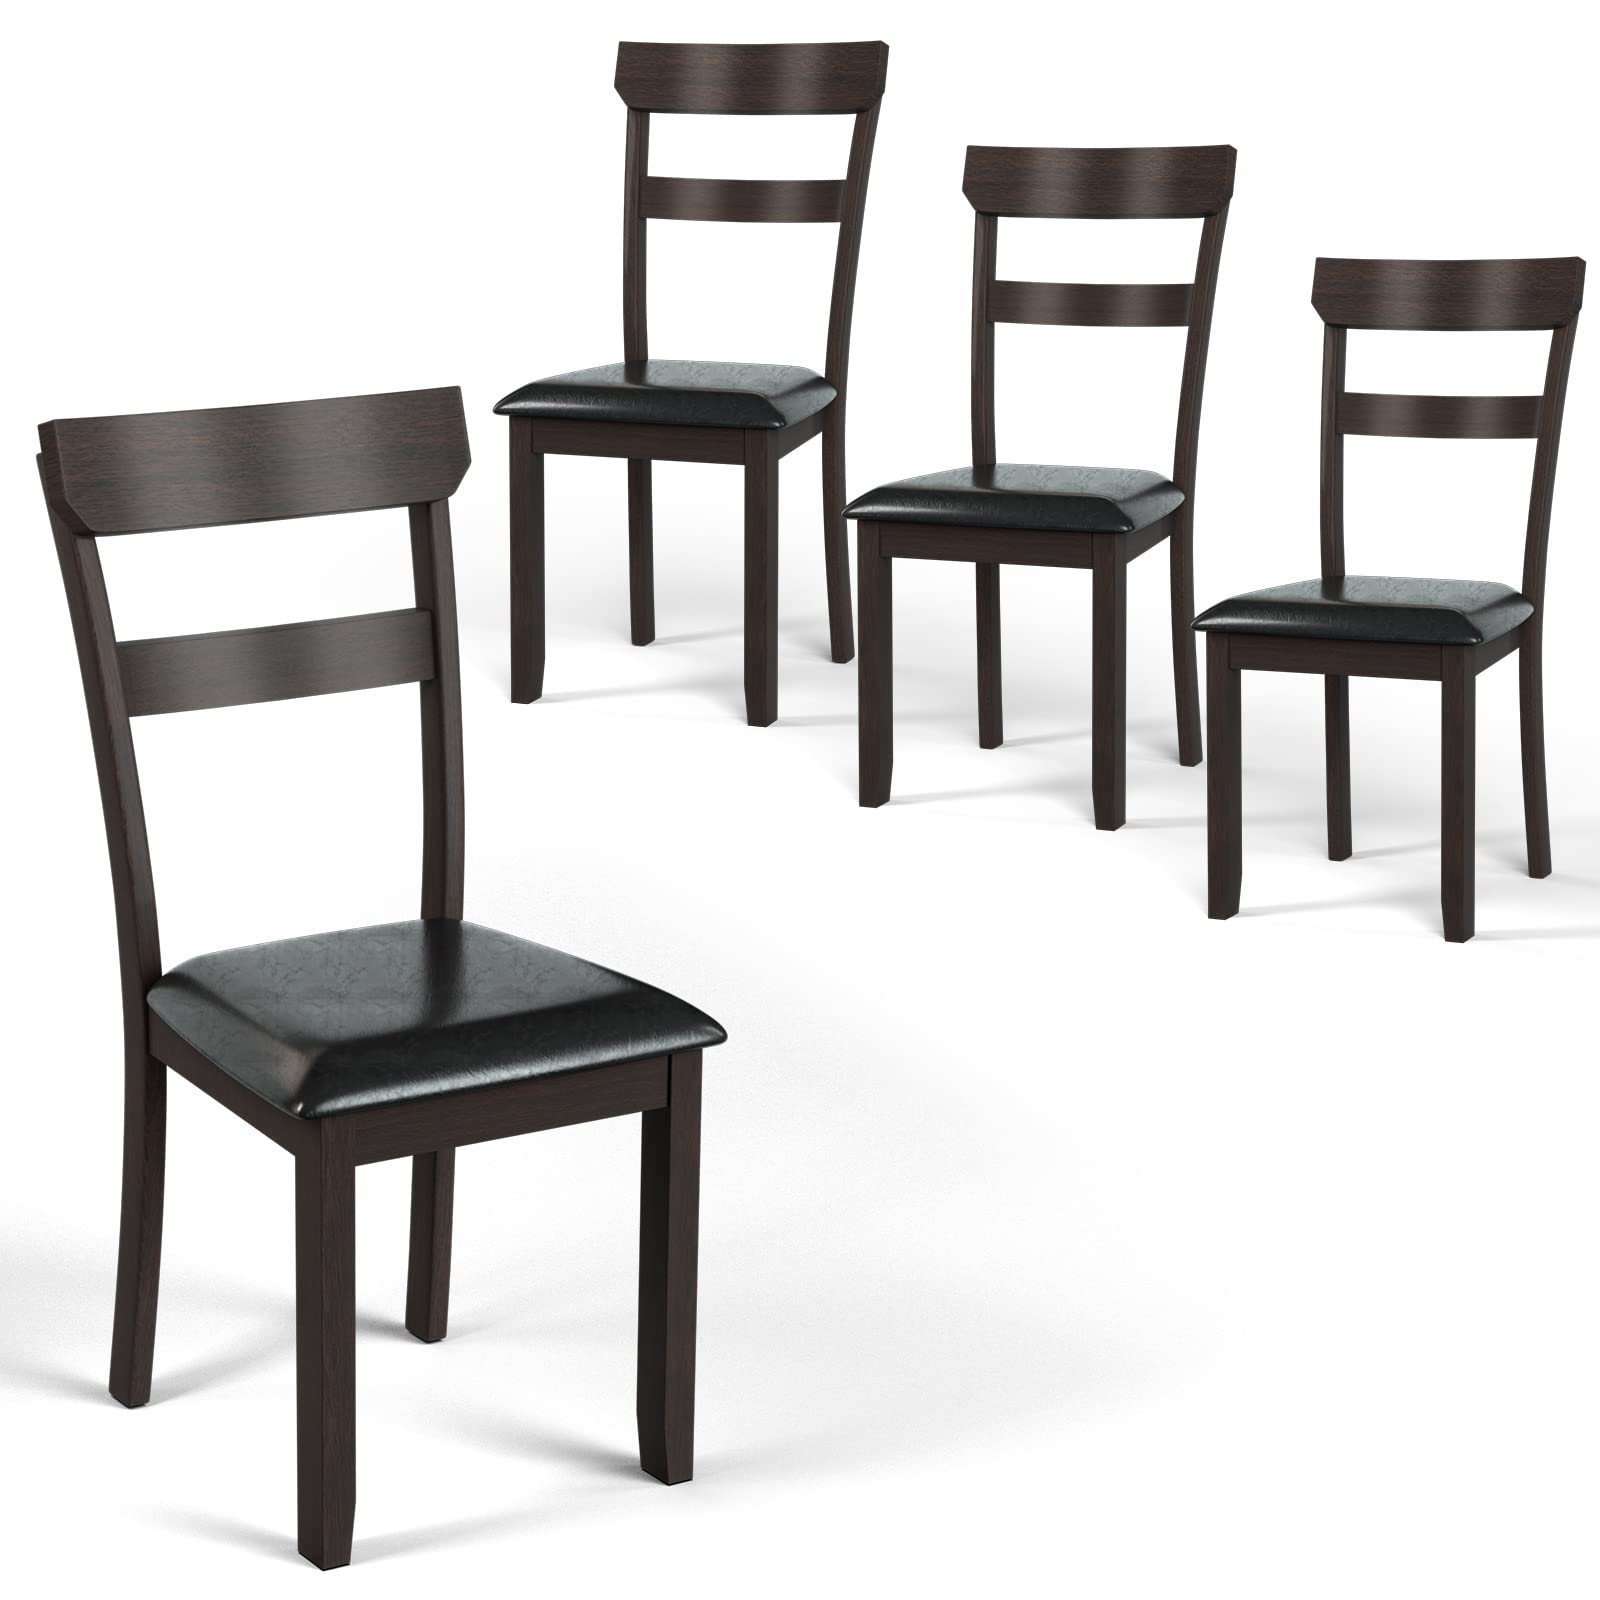 Giantex Black Dining Chairs, Upholstered Leather Kitchen Dining Room Chairs